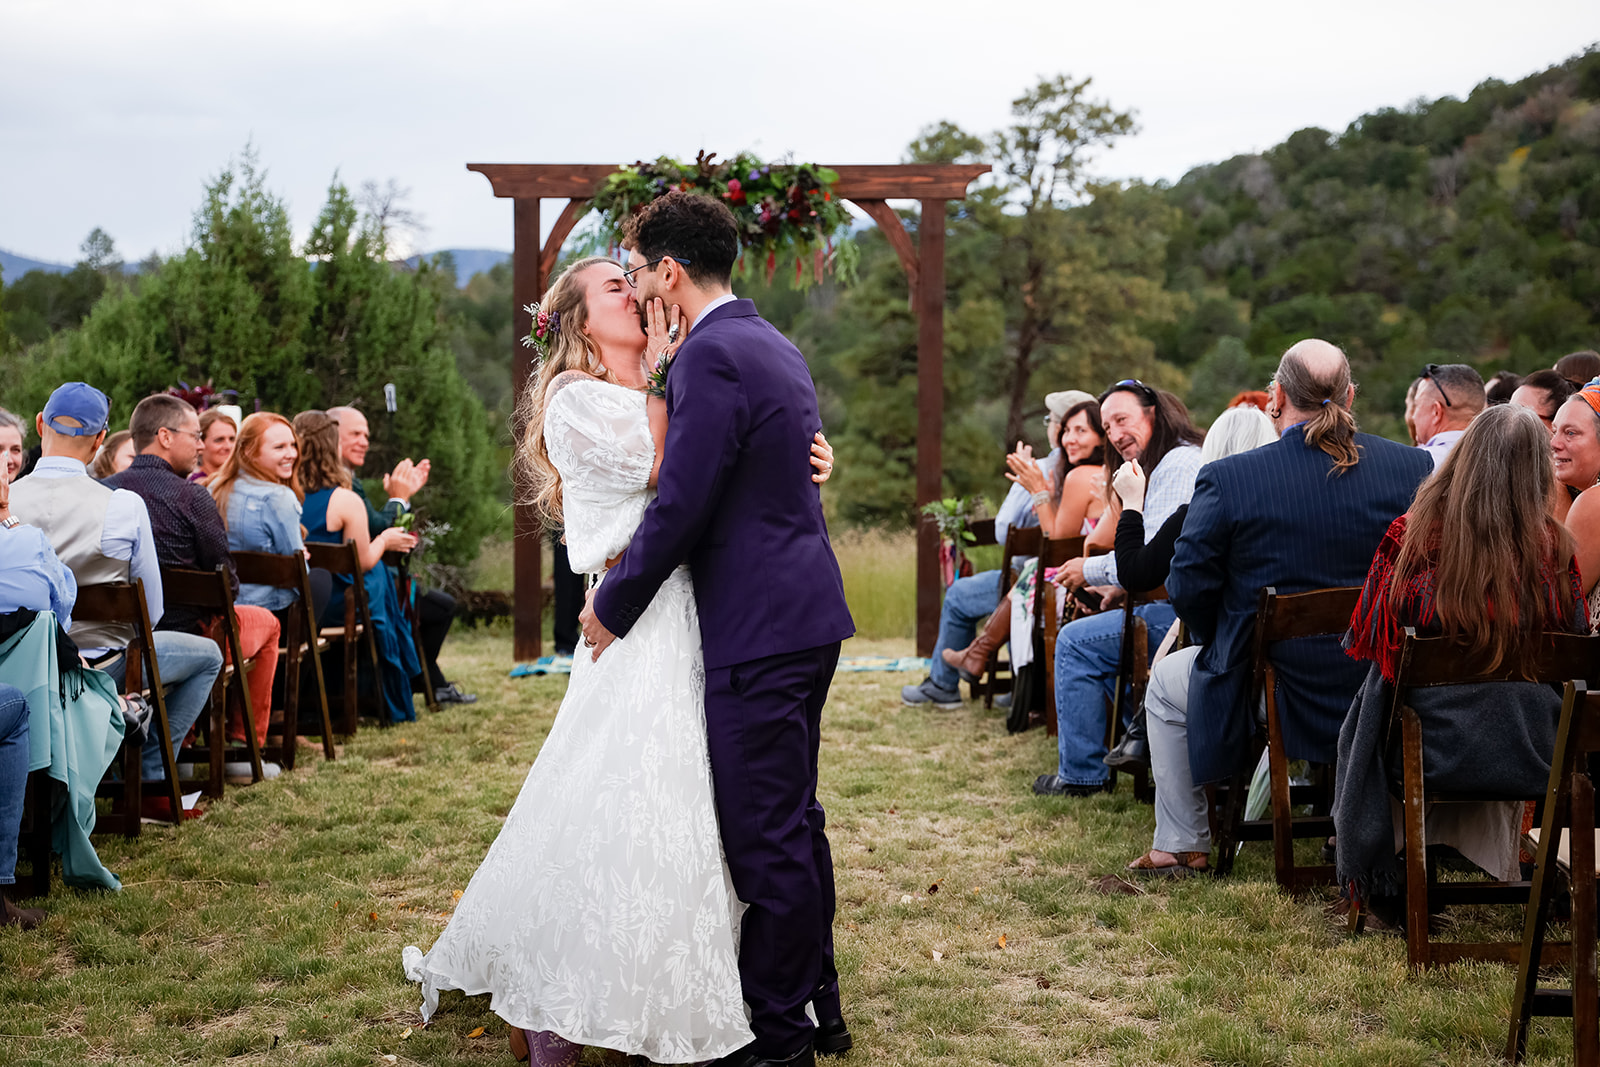 Fun romantic big wedding in Flagstaff, Arizona at a private family ranch best local photographers